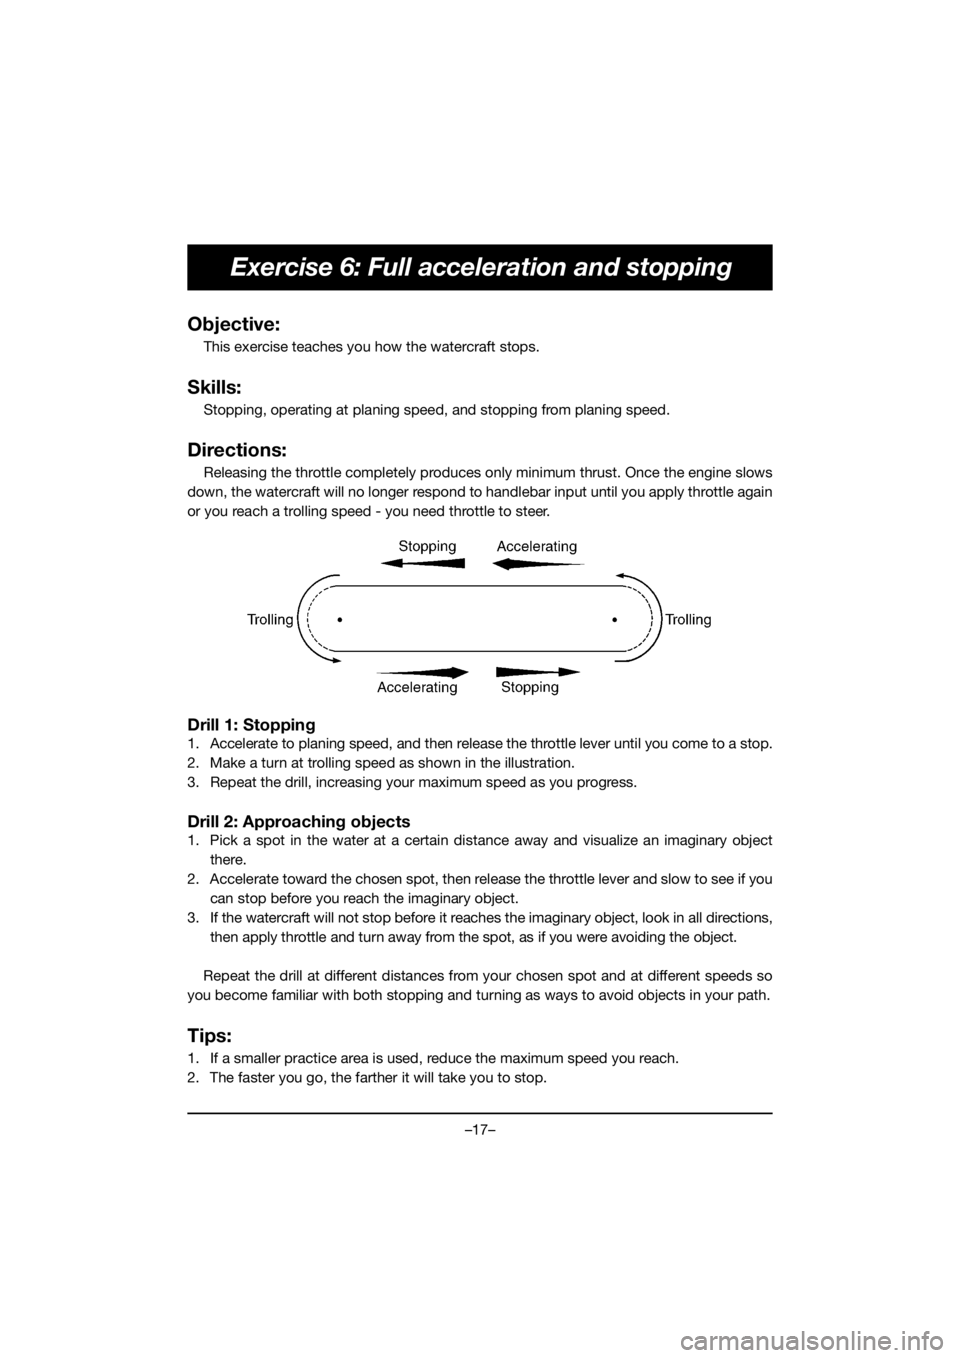 YAMAHA EX DELUXE 2019 Owners Manual –17–
Exercise 6: Full acceleration and stopping
Objective:
This exercise teaches you how the watercraft stops. 
Skills:
Stopping, operating at planing speed, and stopping from planing speed.
Direc